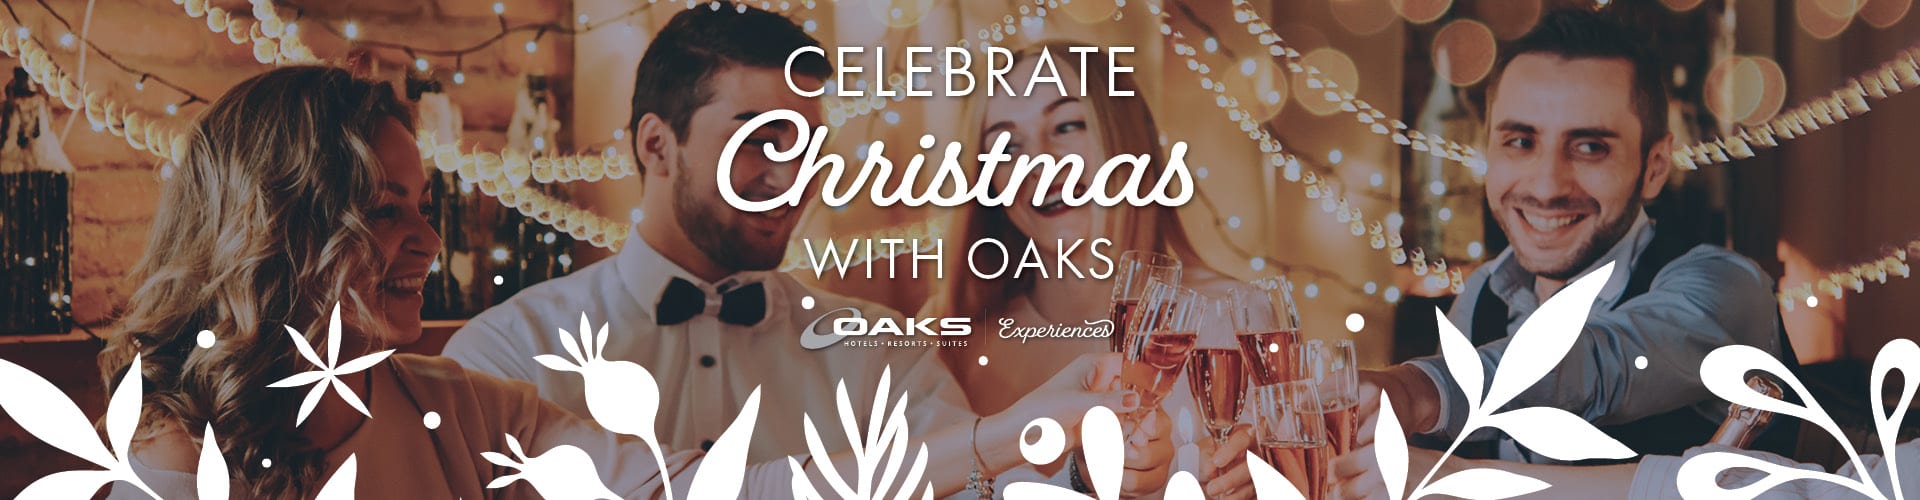 Celebrate Christmas with Oaks with our Christmas Event Packages